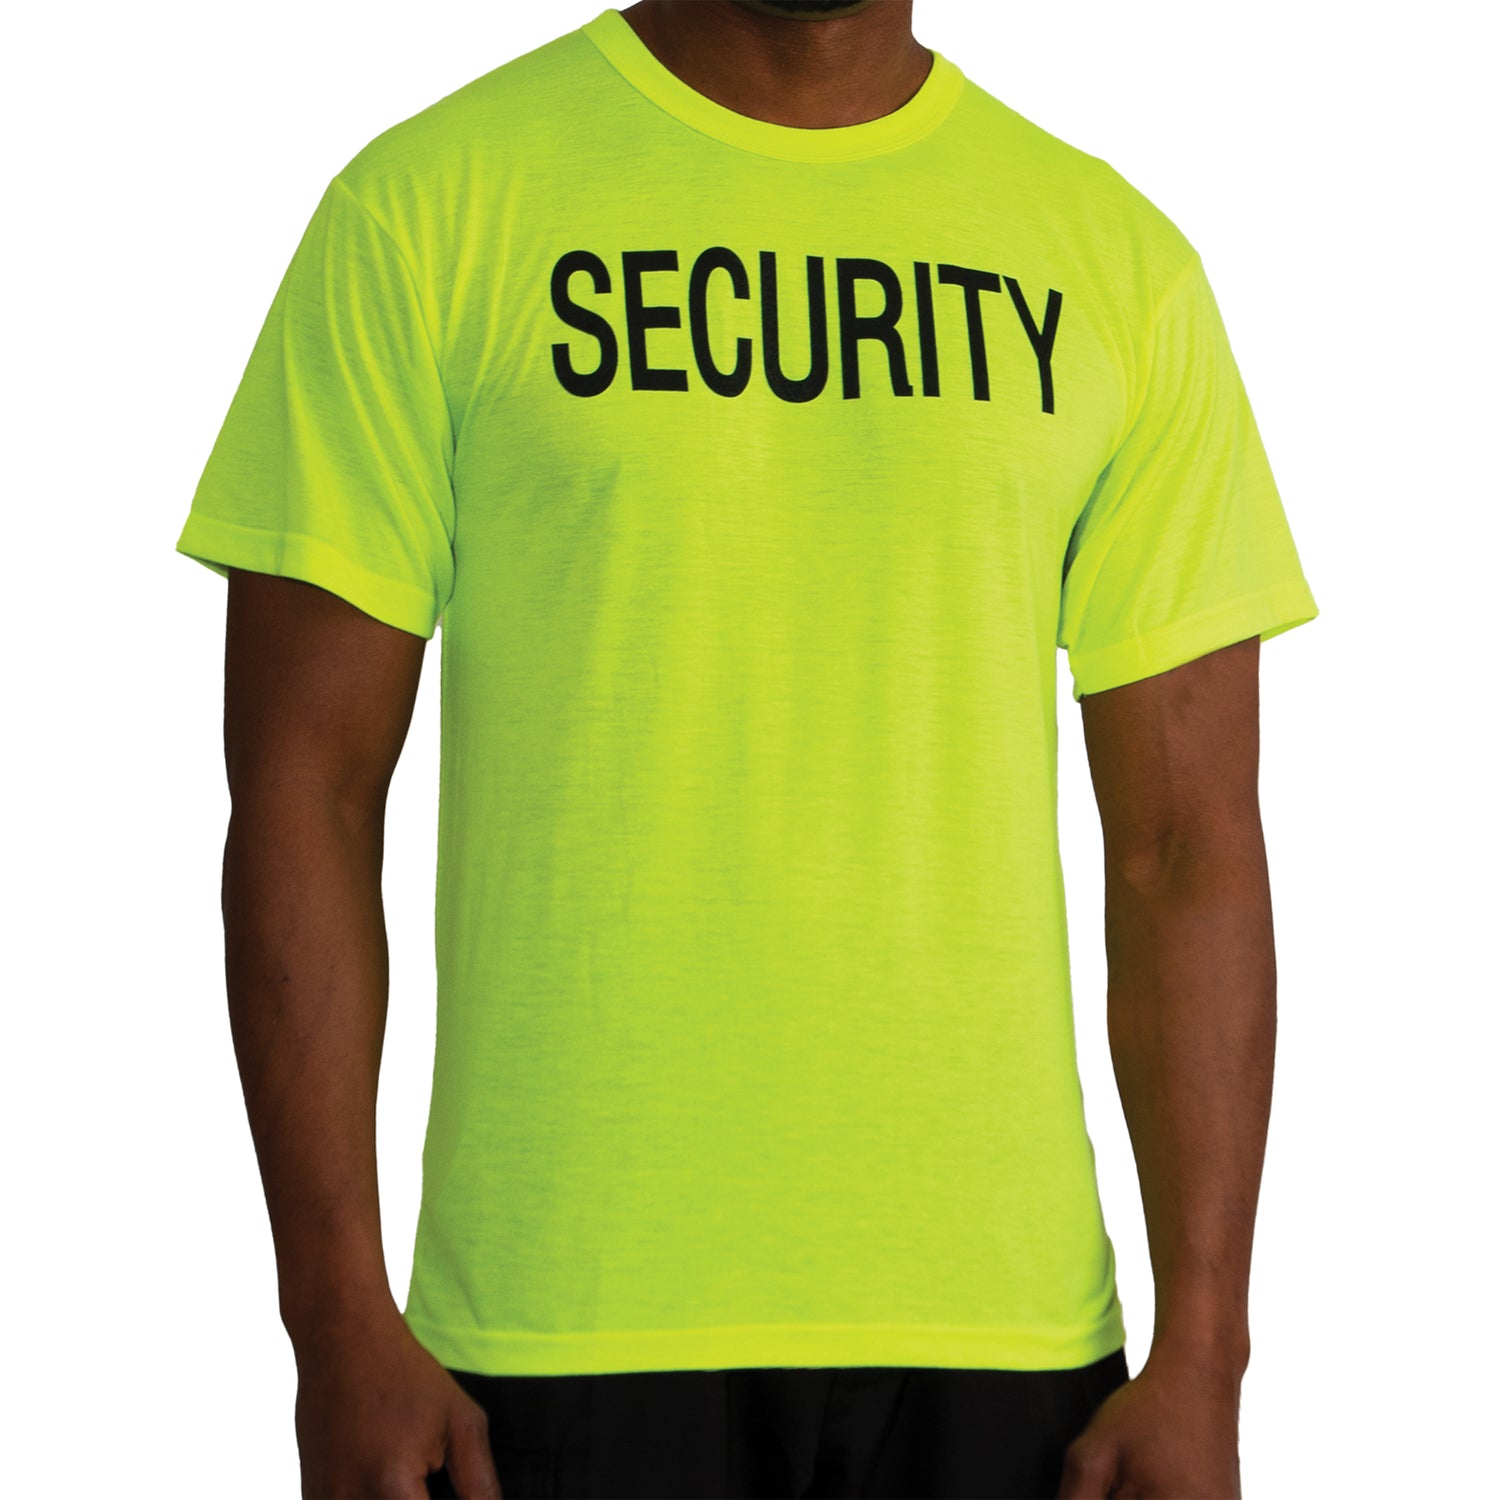 Security Apparel and Gear